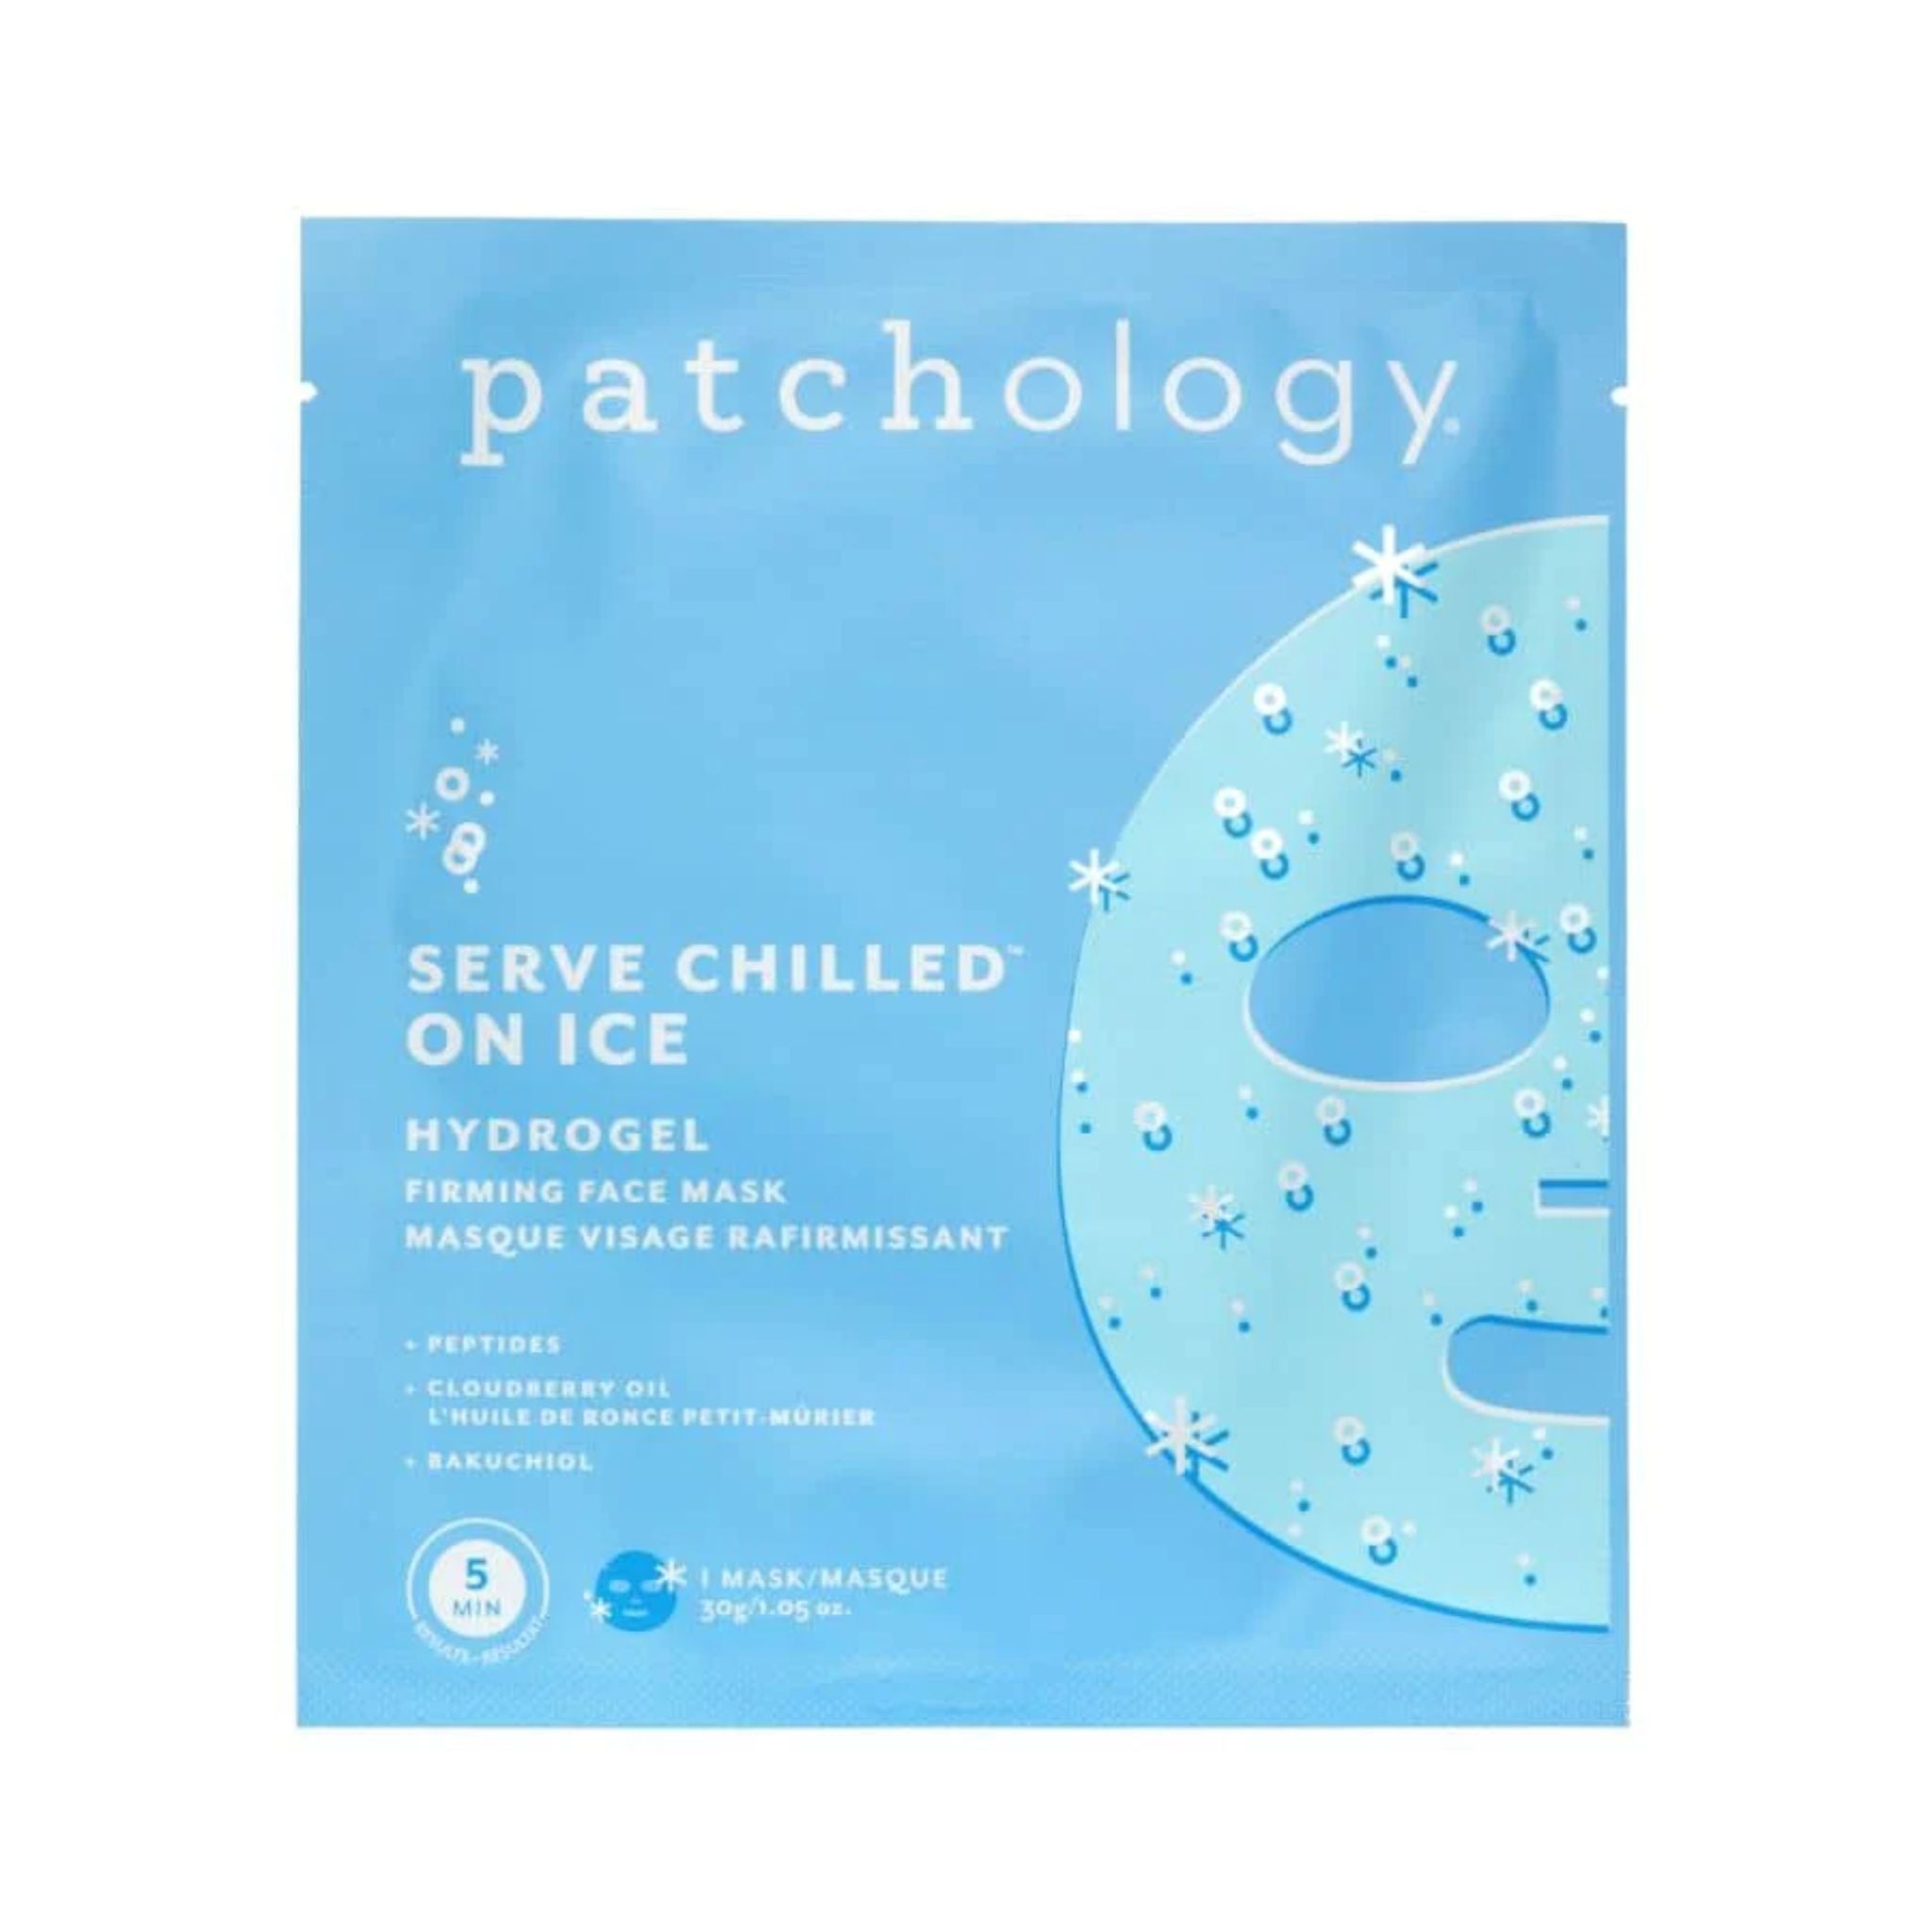 Patchology - Serve Chilled On Ice Hydrogel Firming Face Mask - Single